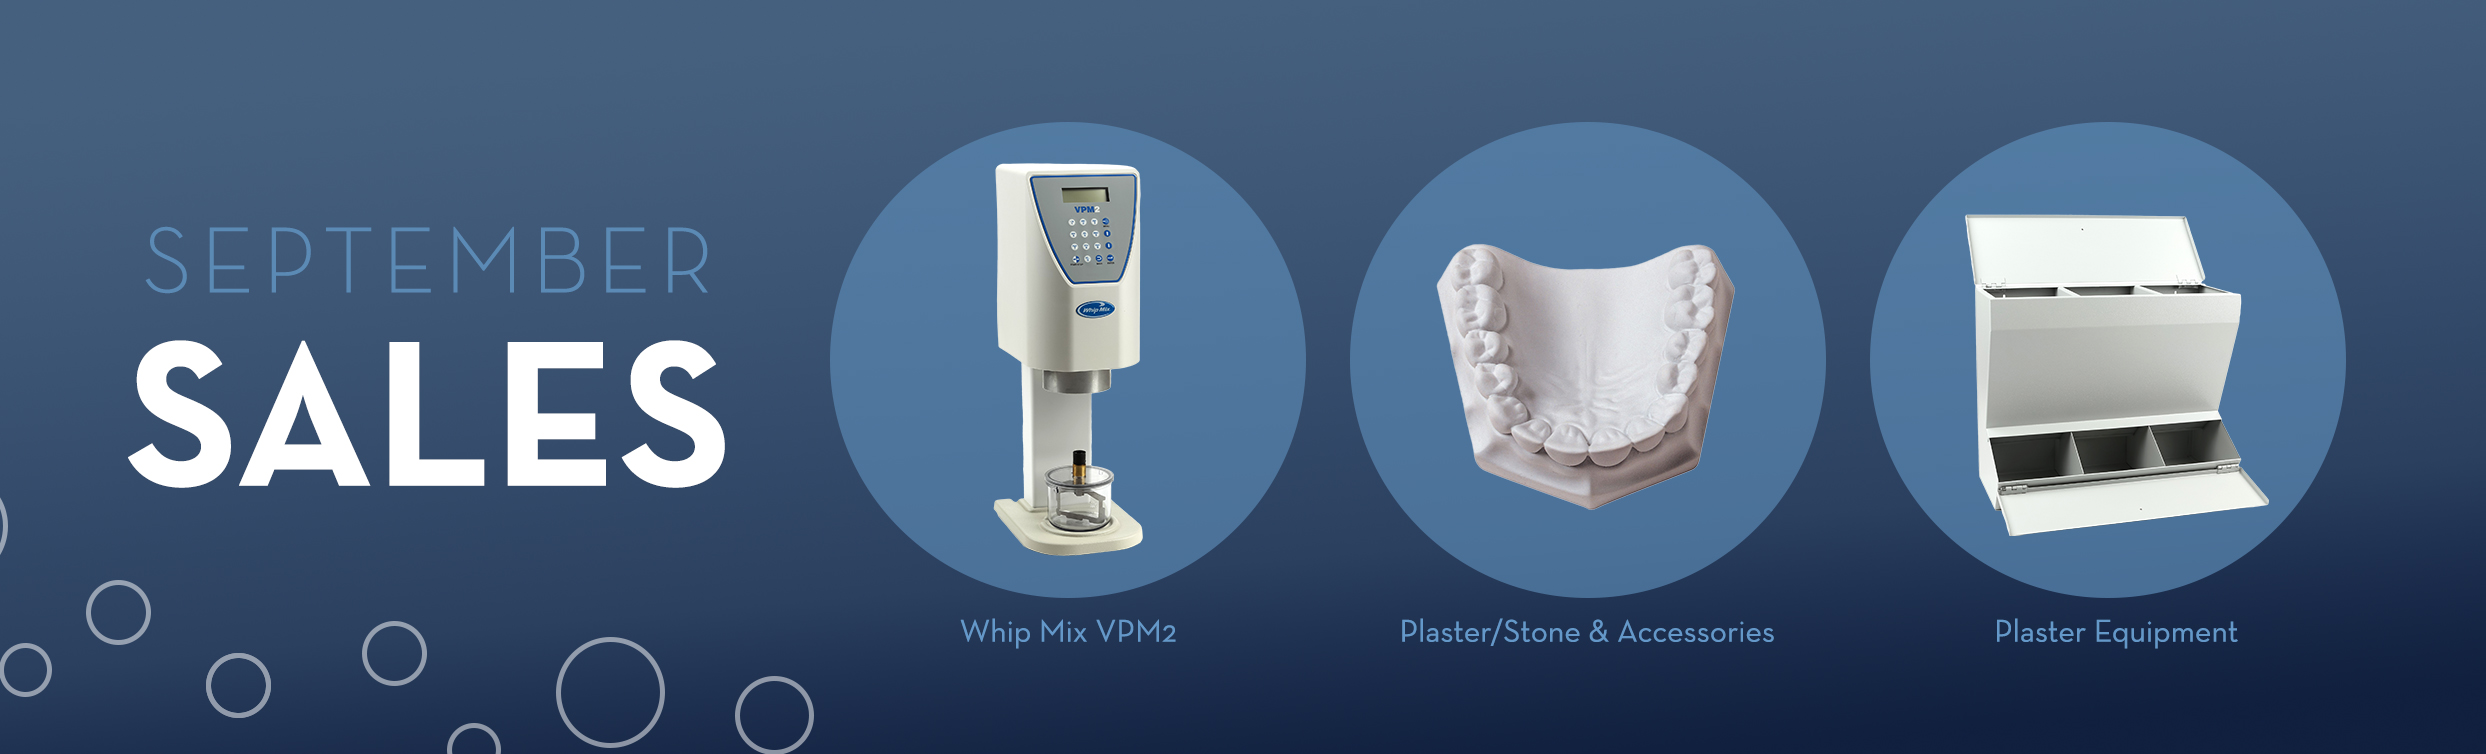 On sale features for September 2023—Whip Mix VPM2, Plaster/Stone & Accessories, and Plaster Equipment 